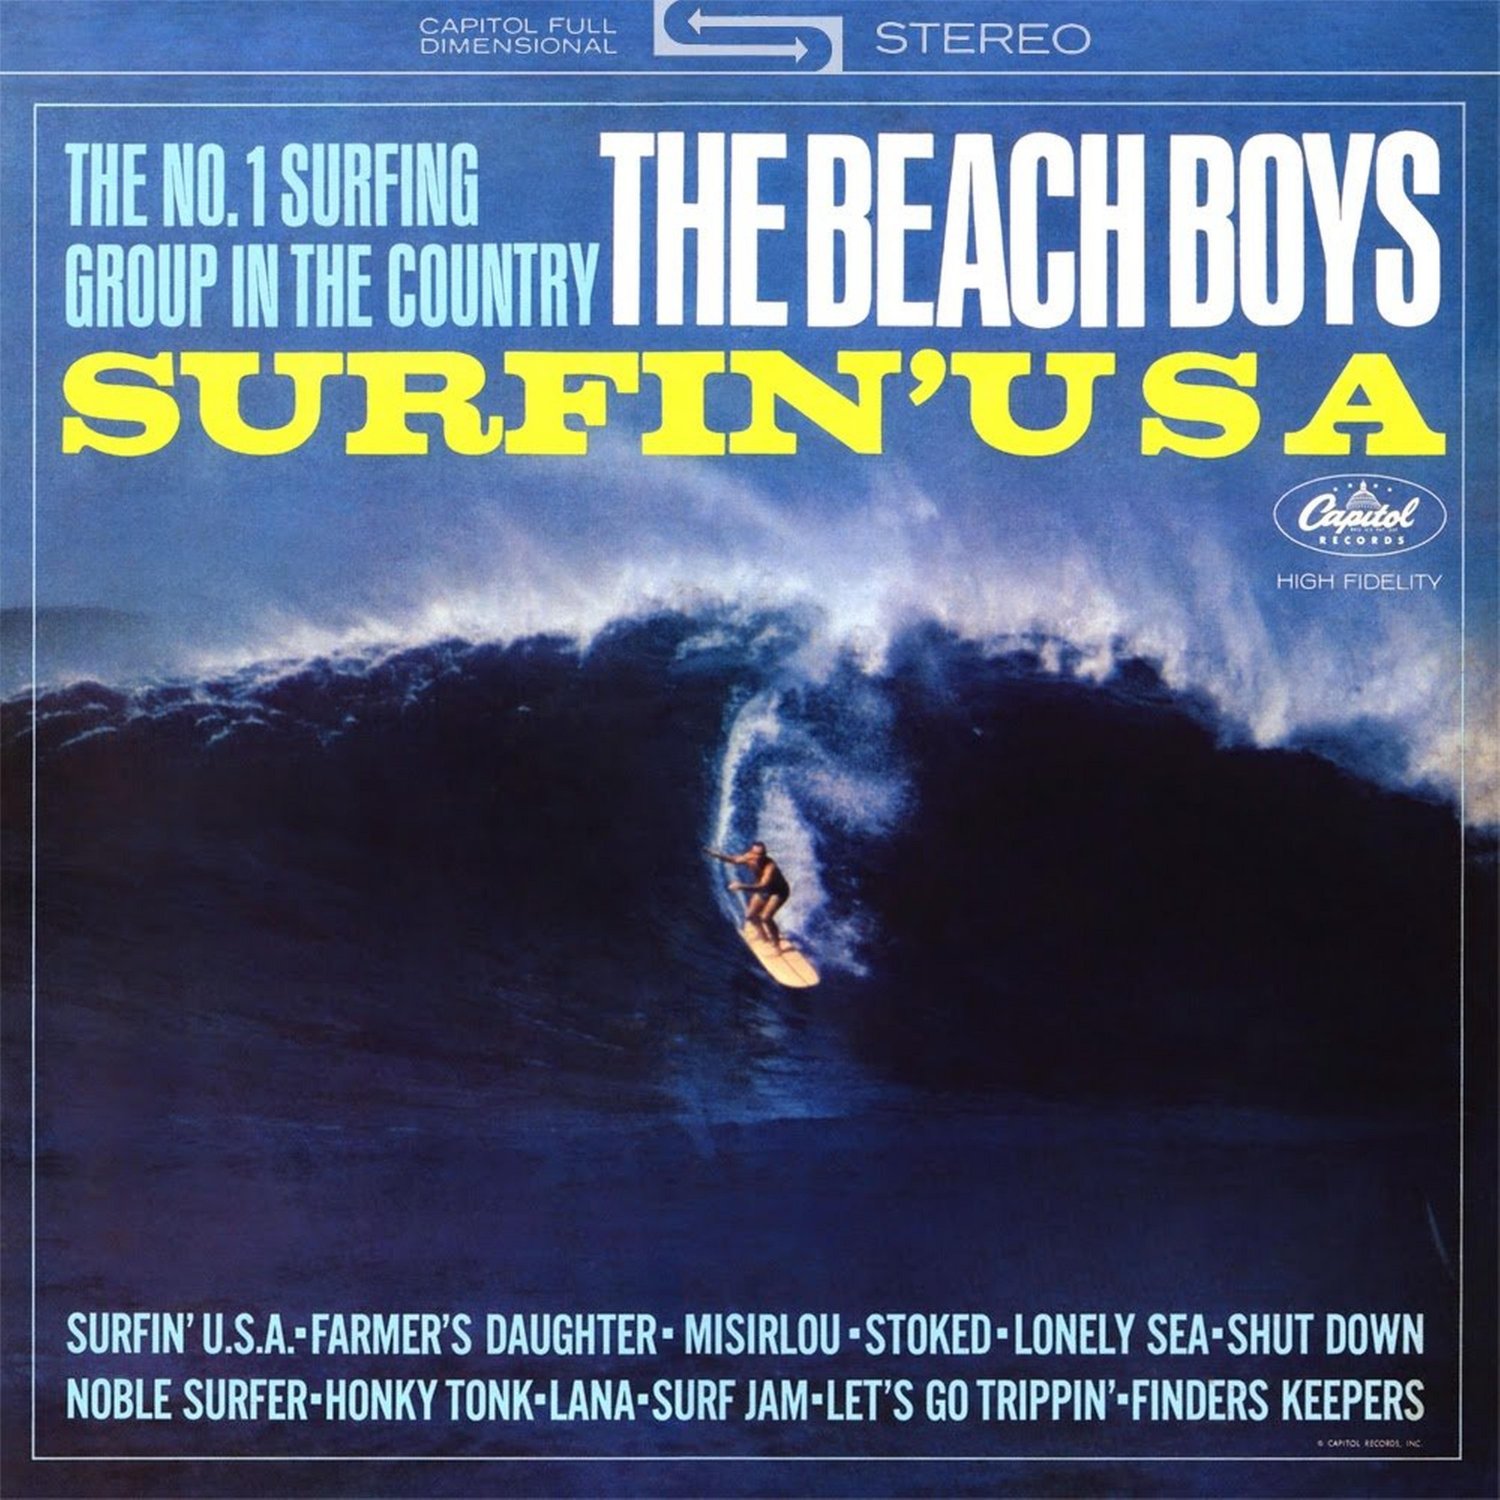 The BEACH BOYS Surfin' USA BANNER Huge 4X4 Ft Fabric Poster Tapestry Flag Print album cover art